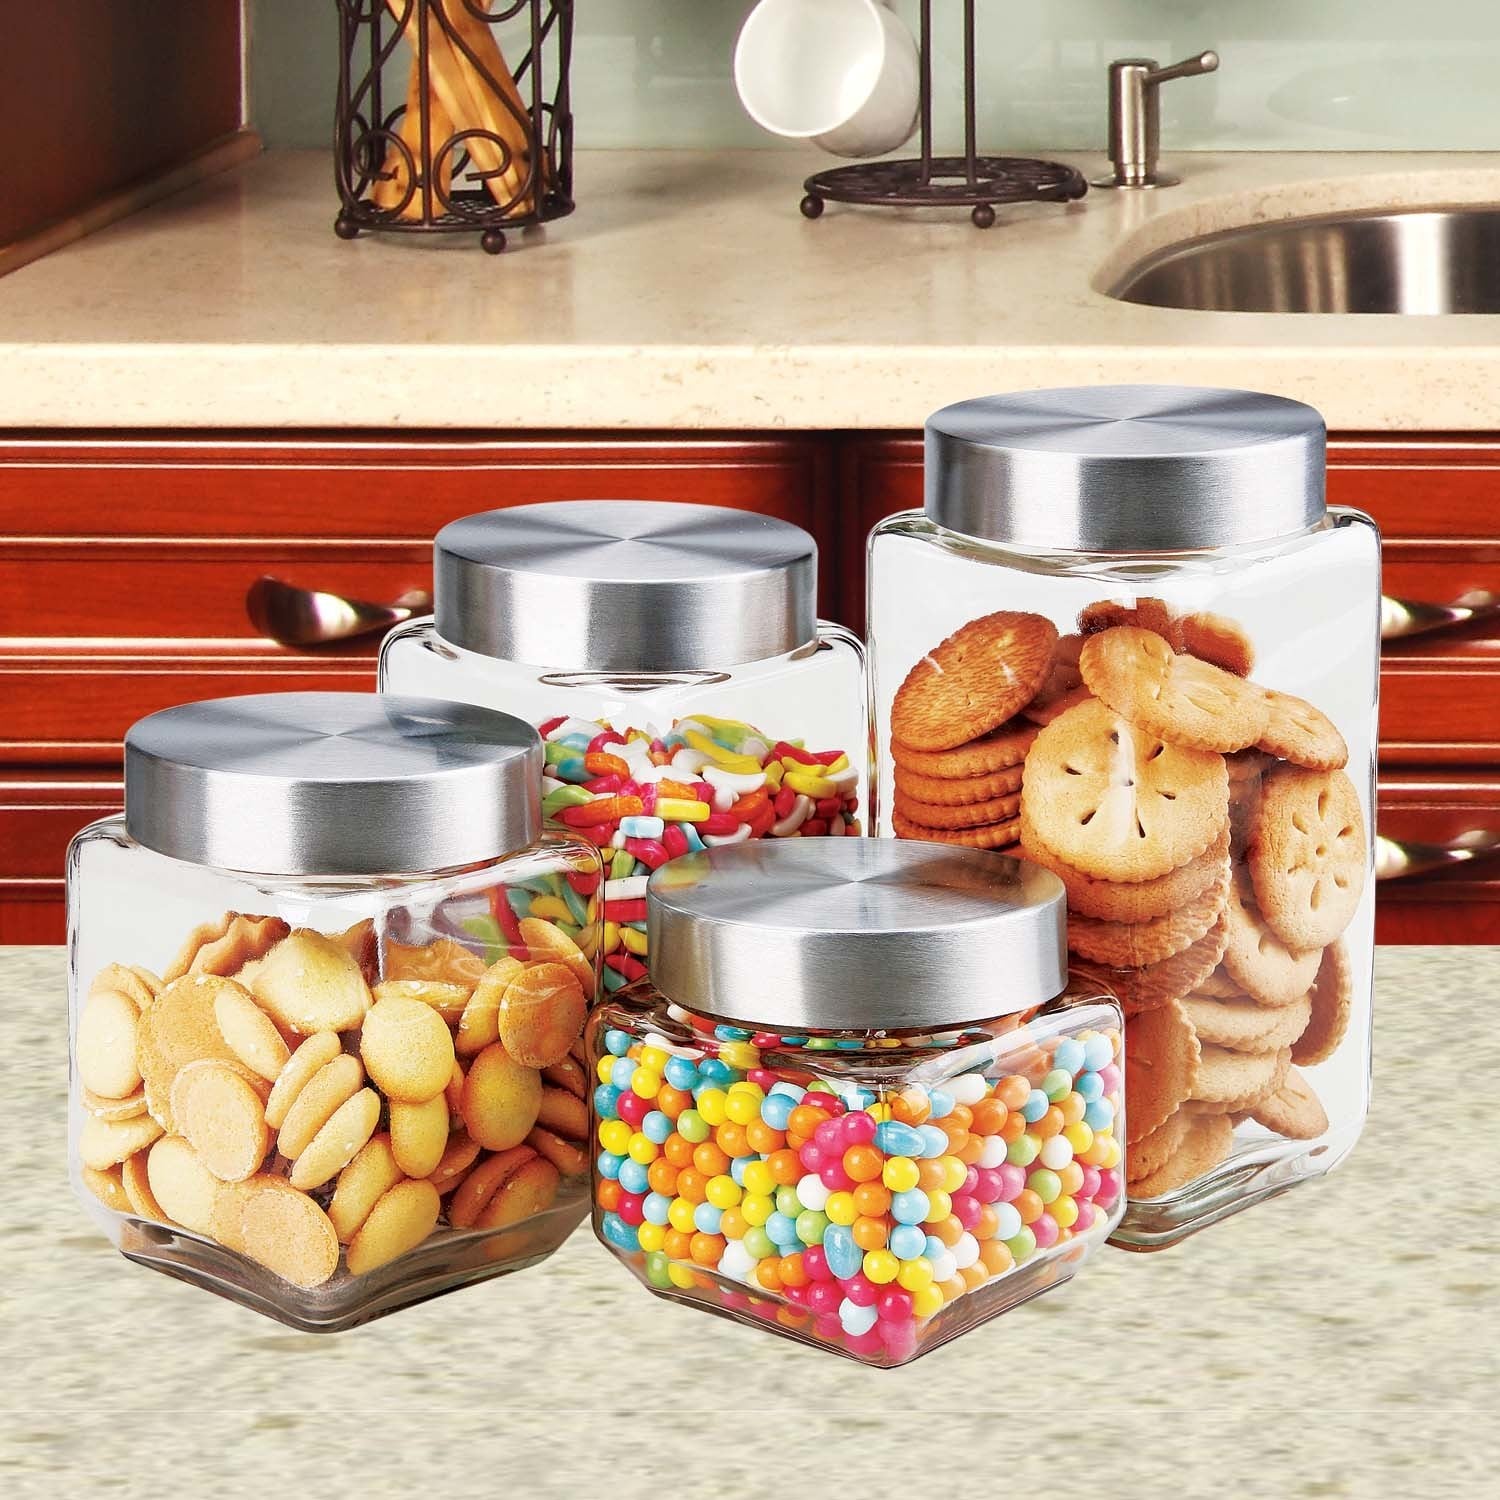 Bene Casa 10-piece glass food storage container set, air tight led  containers, oven safe, microwave safe - 10pc Glass Storage - On Sale - Bed  Bath & Beyond - 33044492